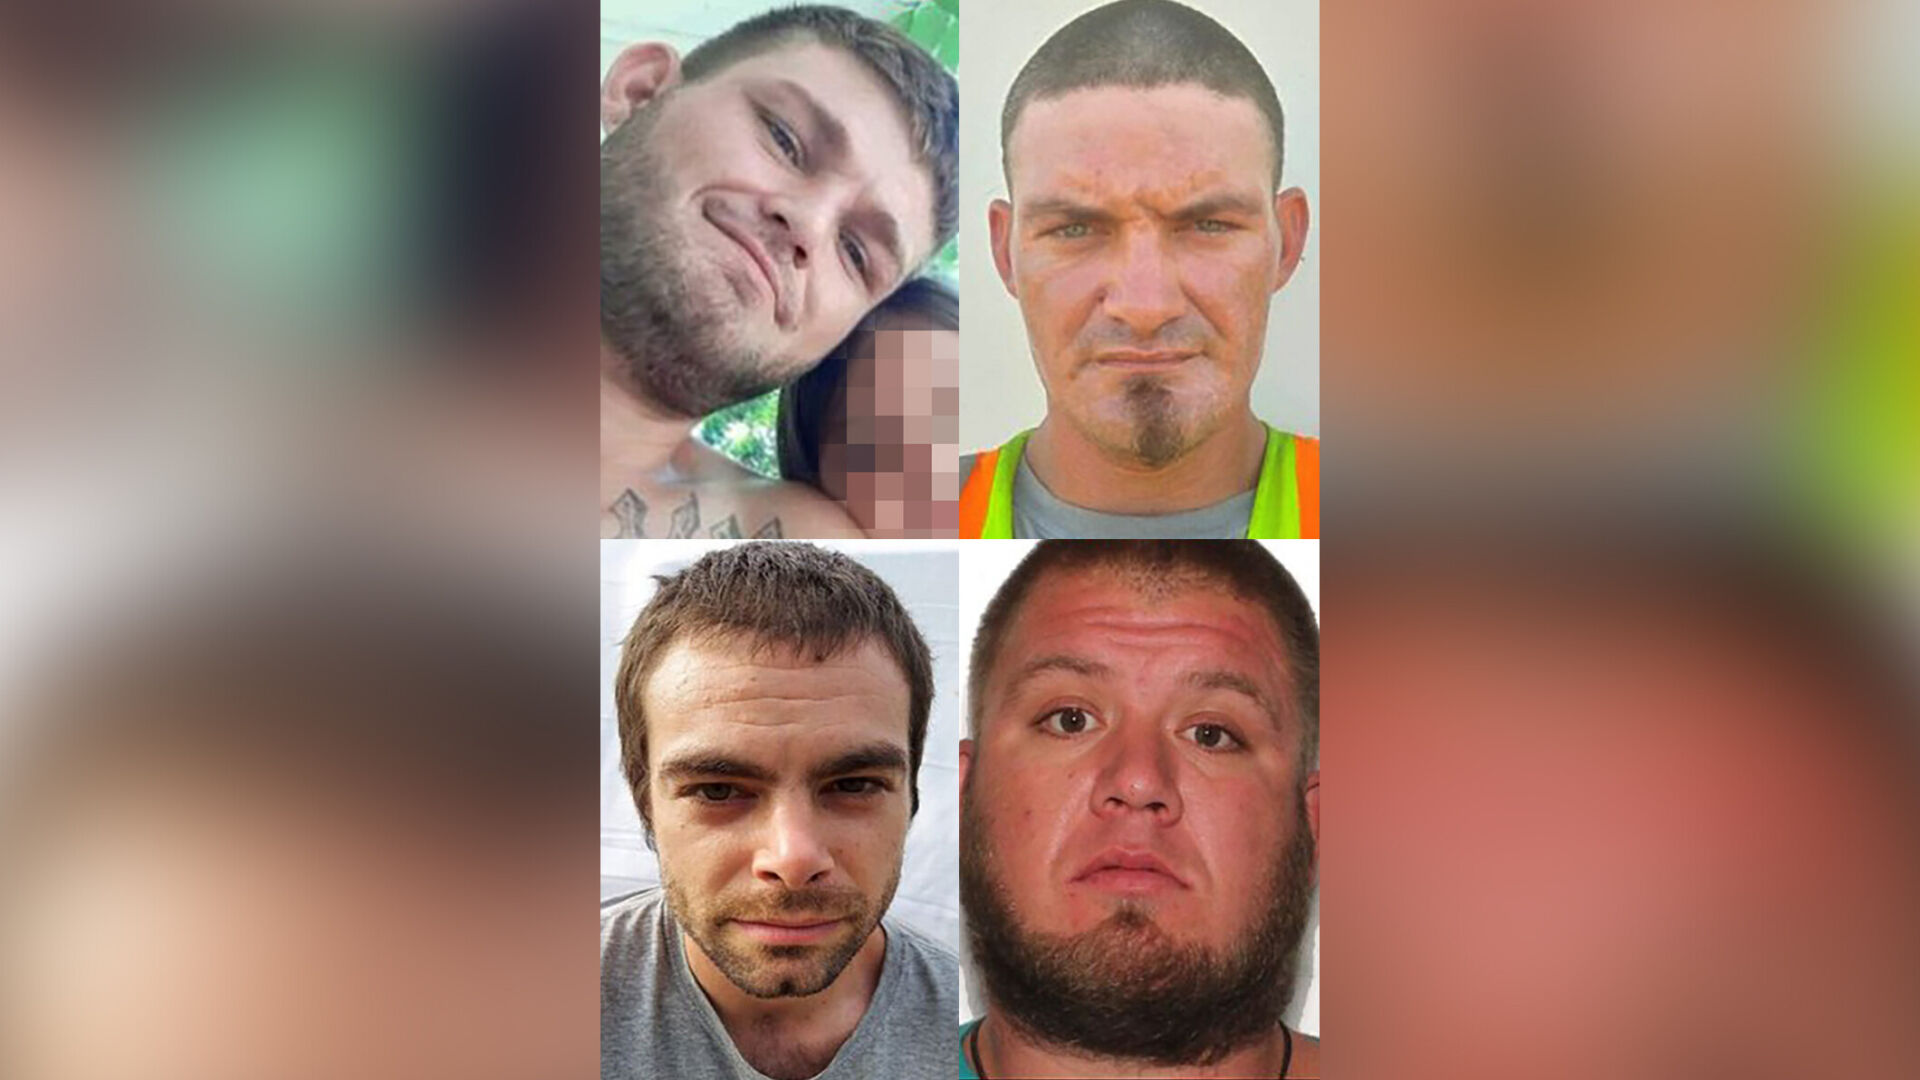 Investigators say theyre chasing new leads every day to uncover what led to the killings of 4 men found in an Oklahoma river Crime and Courts waow pic